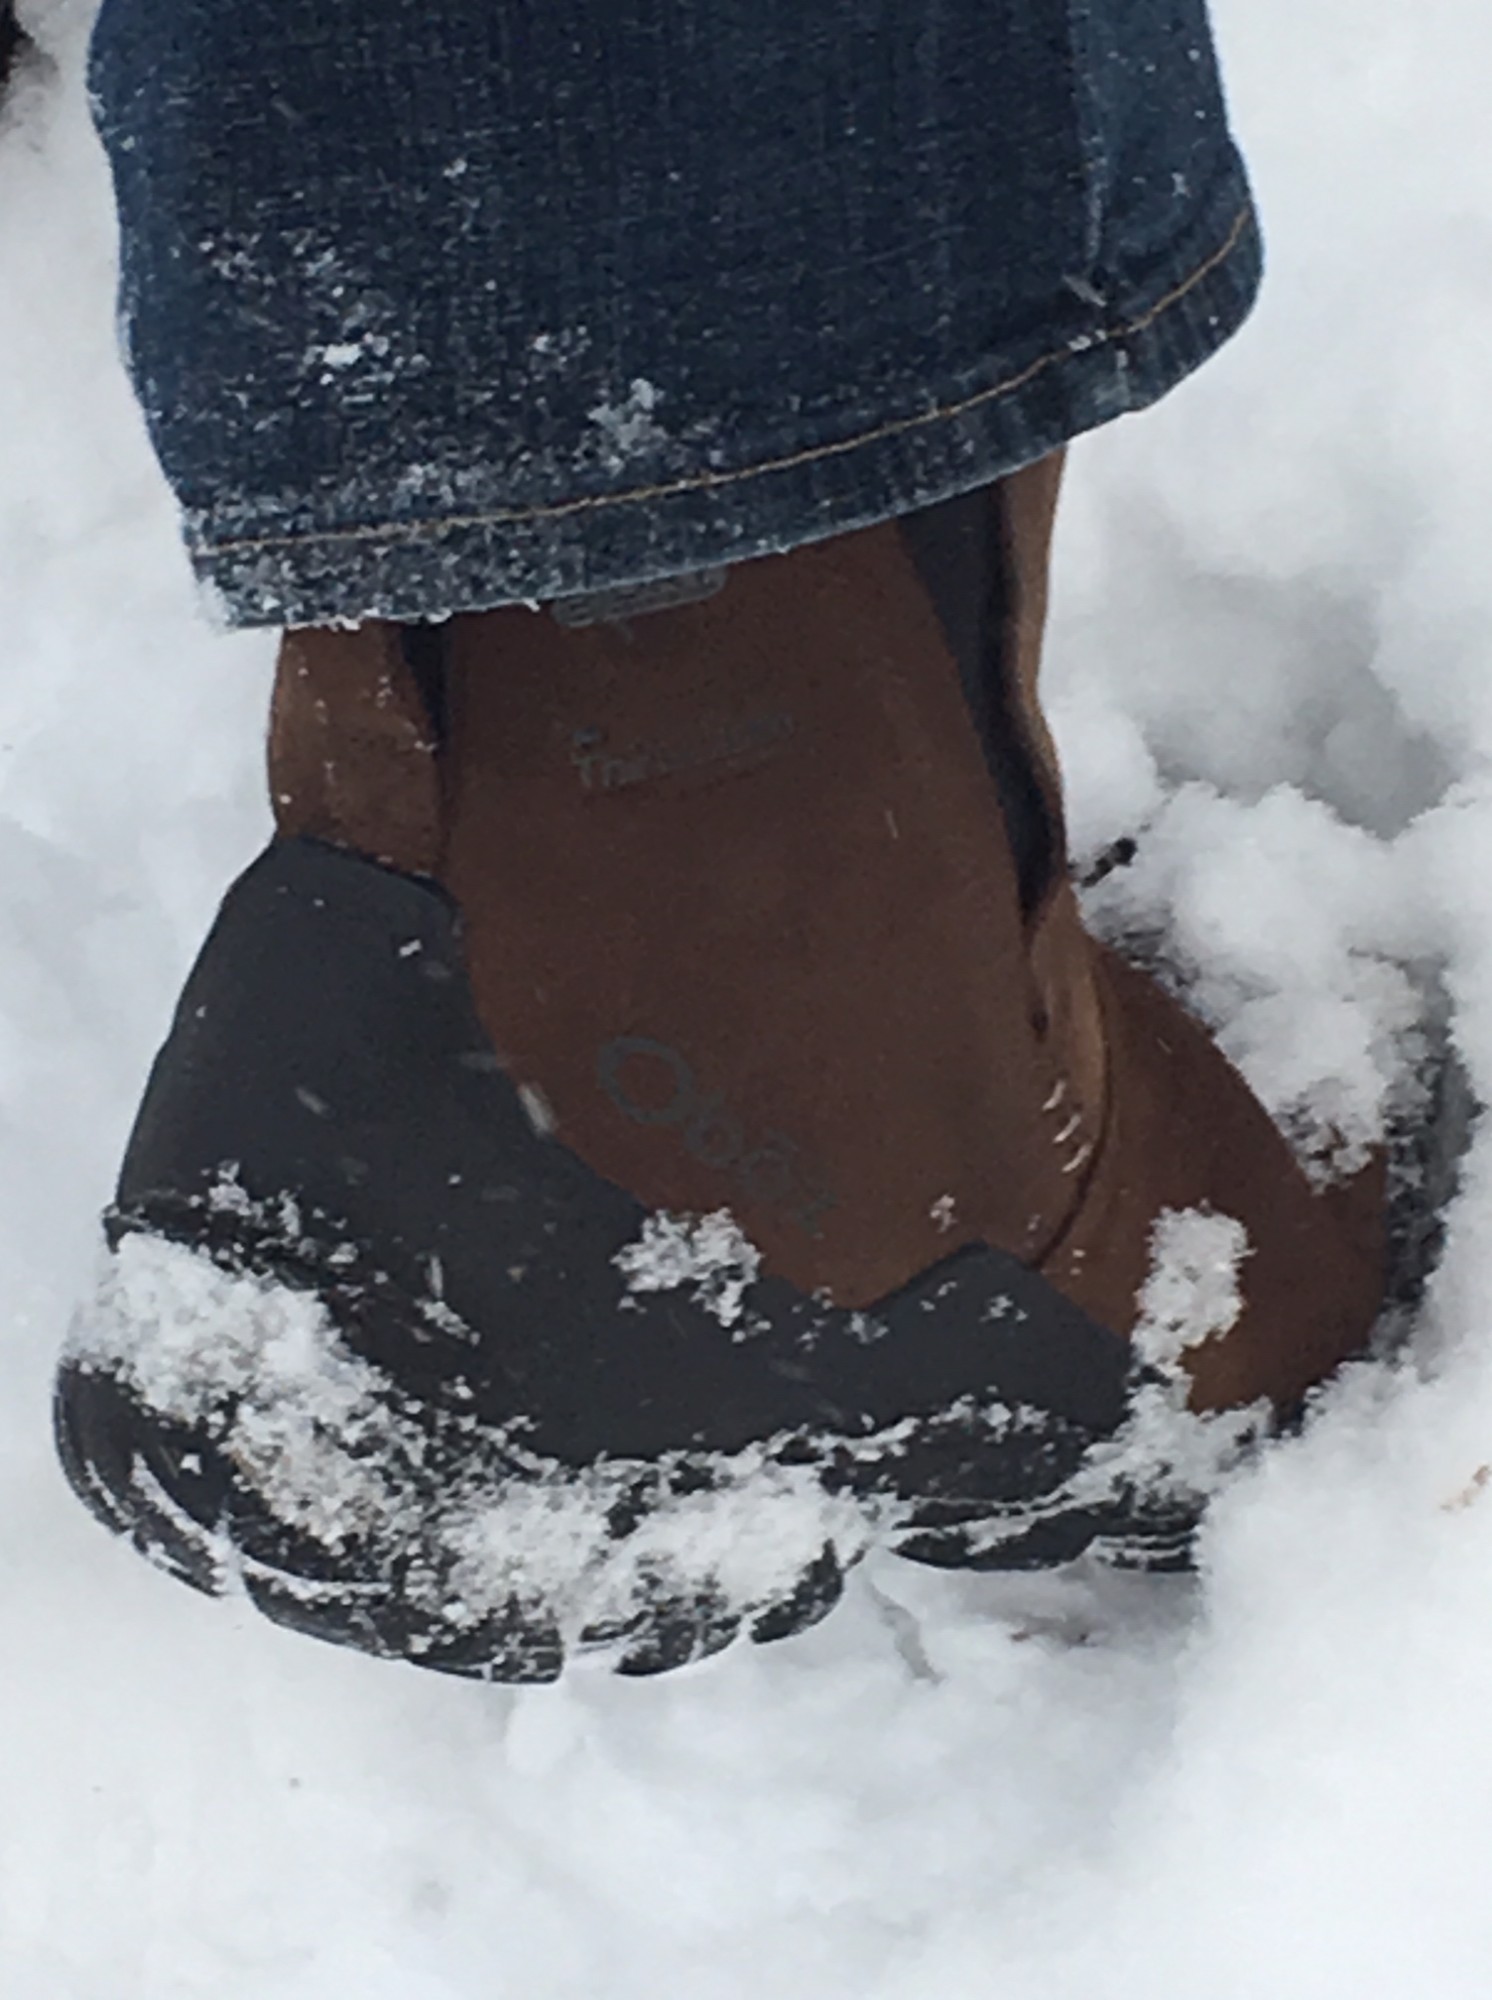 Oboz Footwear Review: Big Sky Slip-On Boots close up